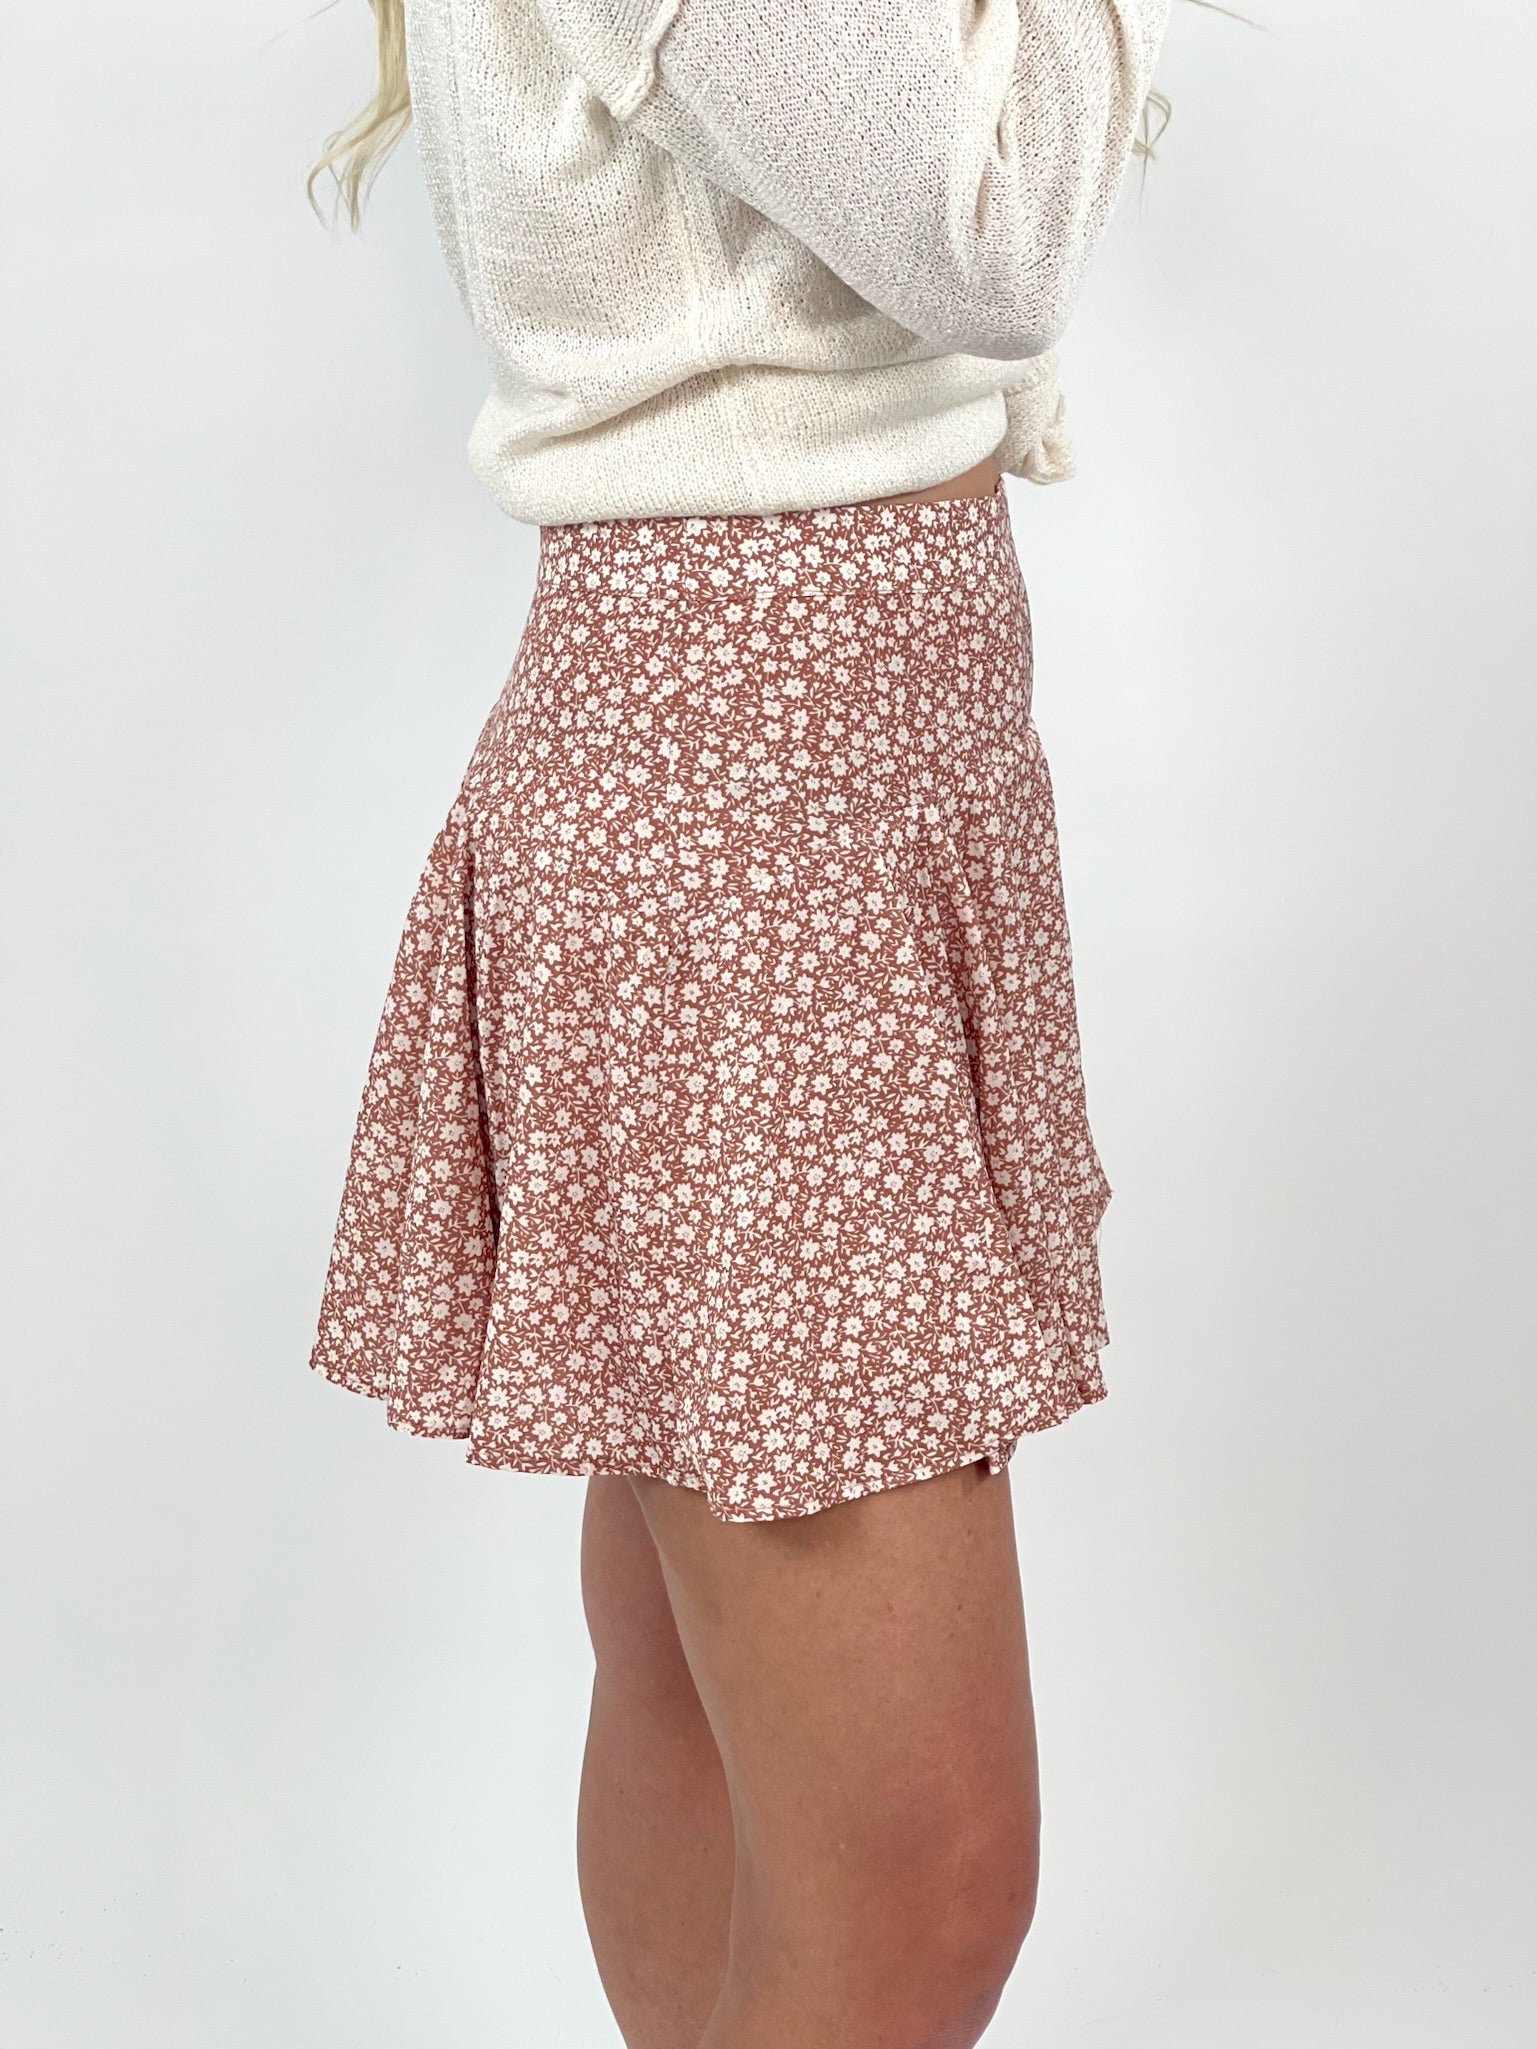 A Moment In Time Floral Print Rust Flare Mini Skirt (Skort)